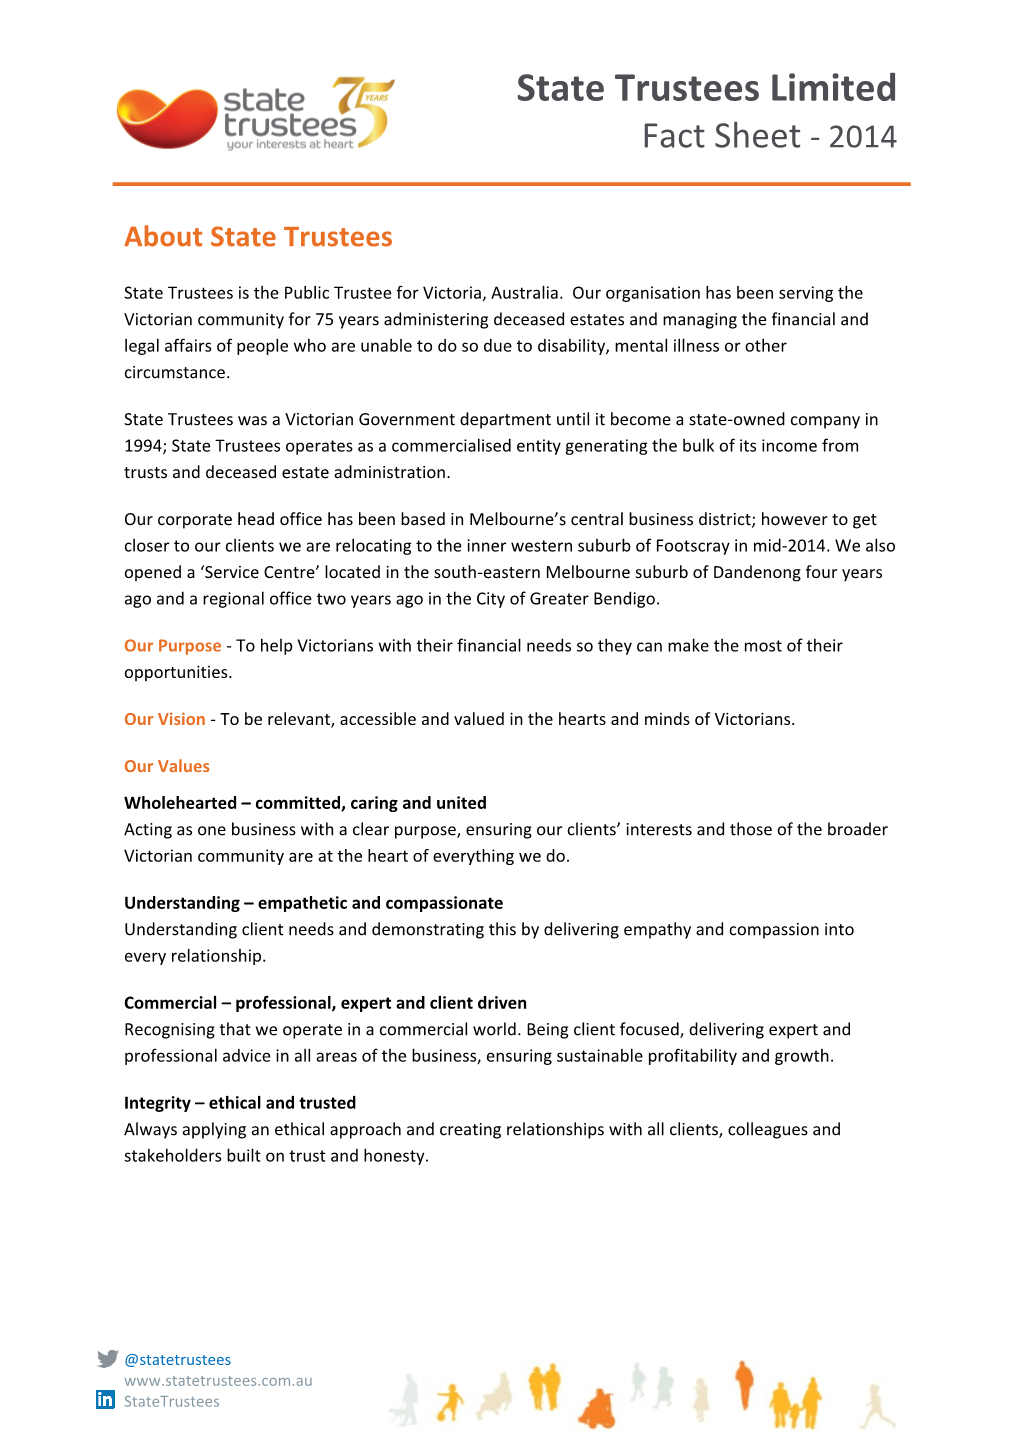 State Trustees Limited Fact Sheet ‐ 2014